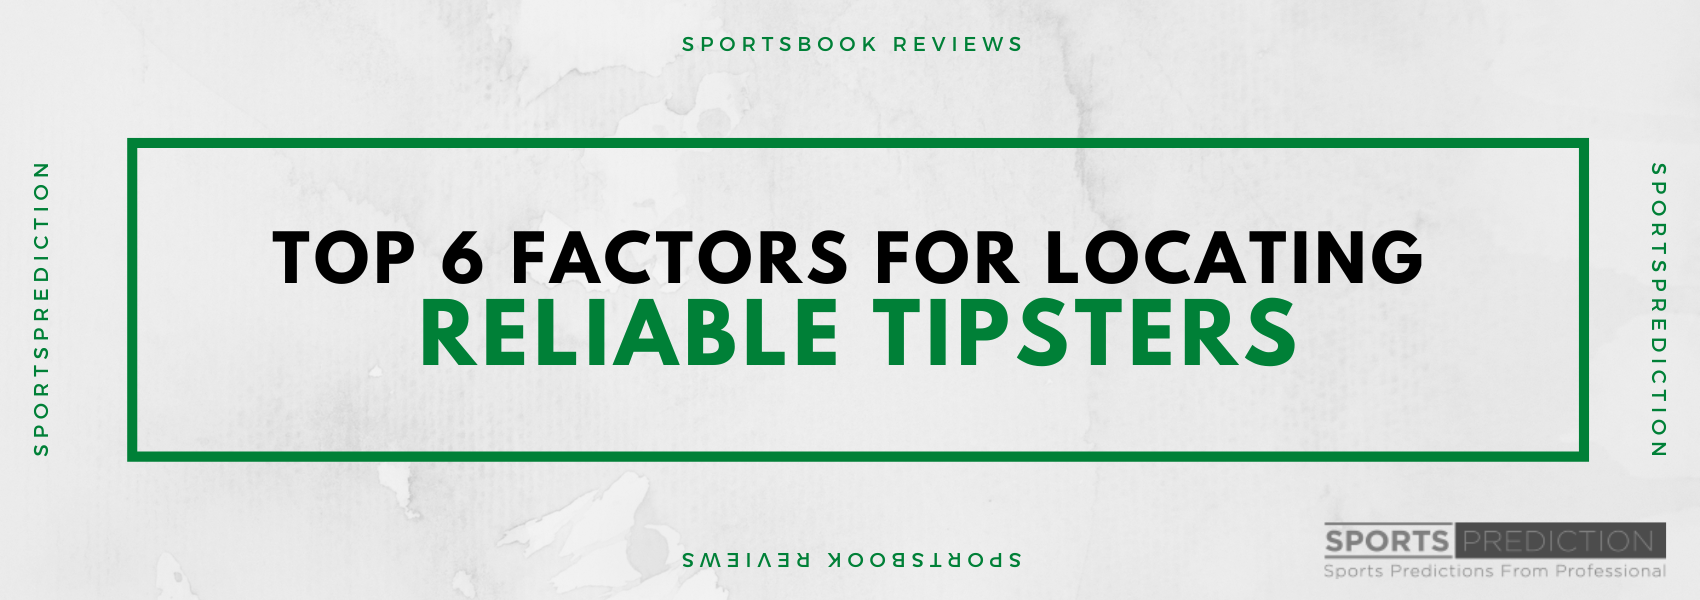 What Are The Top 6 Factors For Locating Reliable Tipsters?